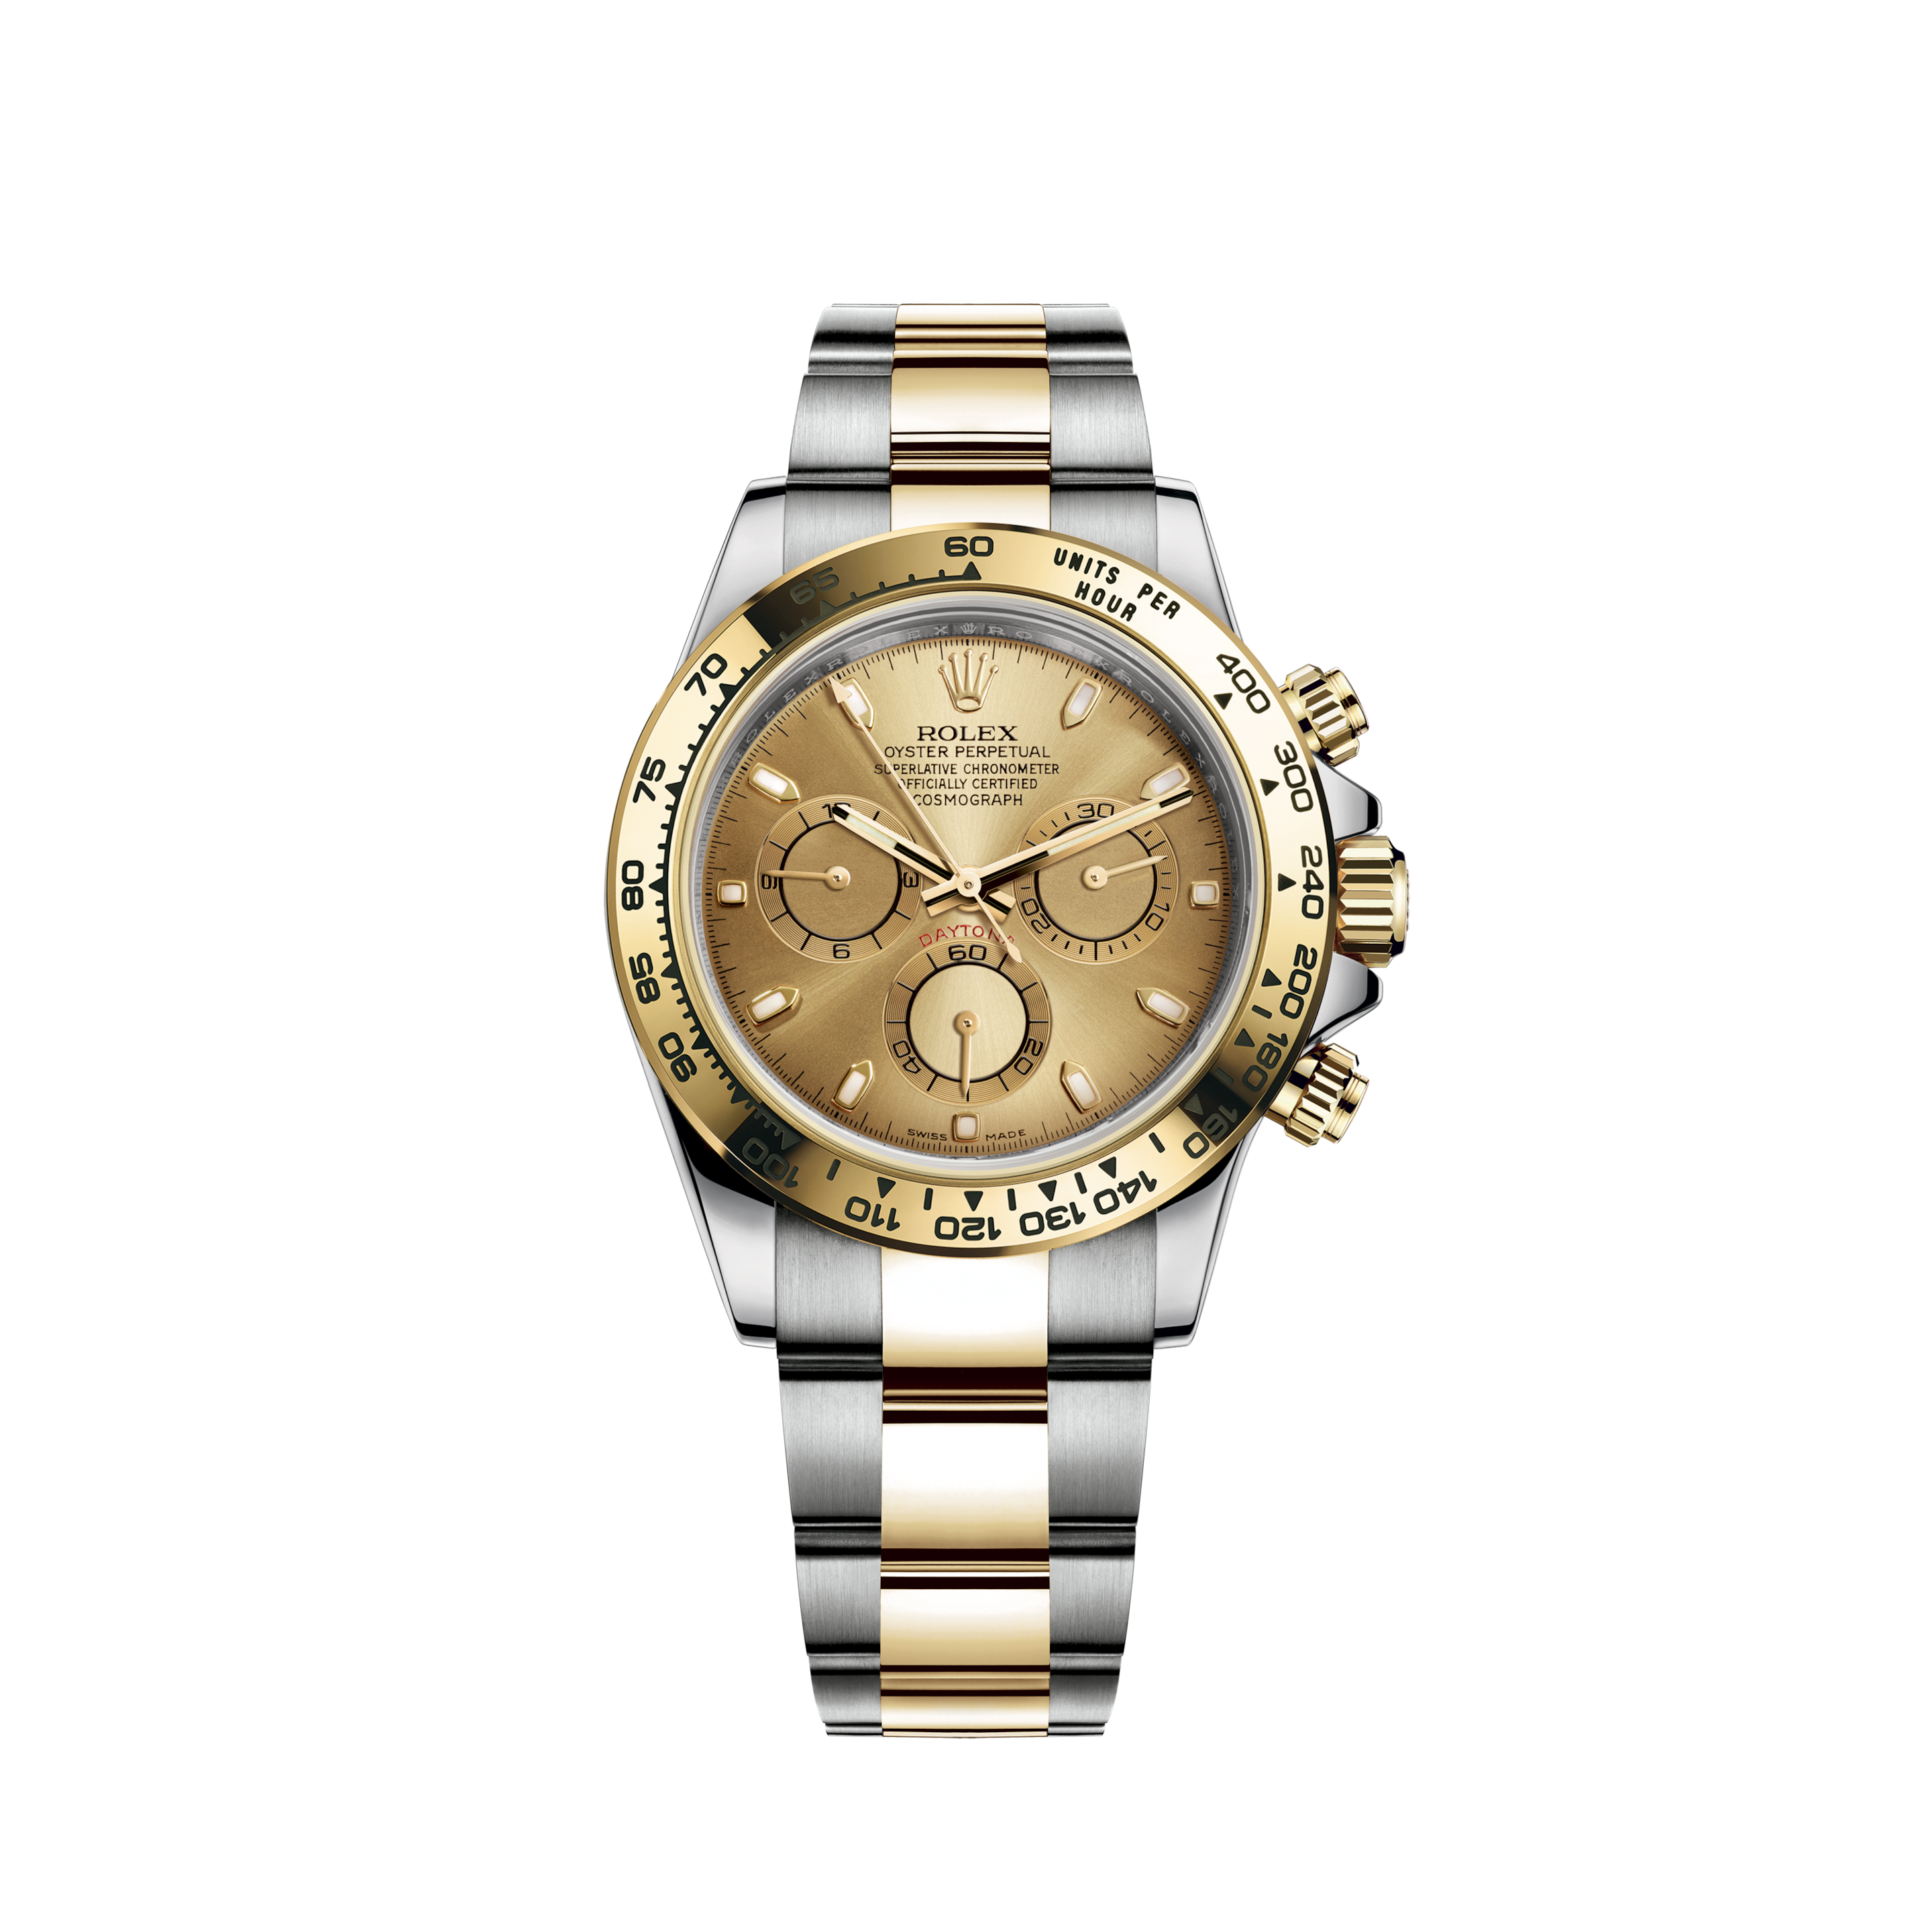 Rolex 16013 Mens Datejust Stainless Steel and Yellow Gold Champagne Tapestry Index DialRolex 16014 Datejust 36mm Stainless Steel Green Diamond Dial Watch